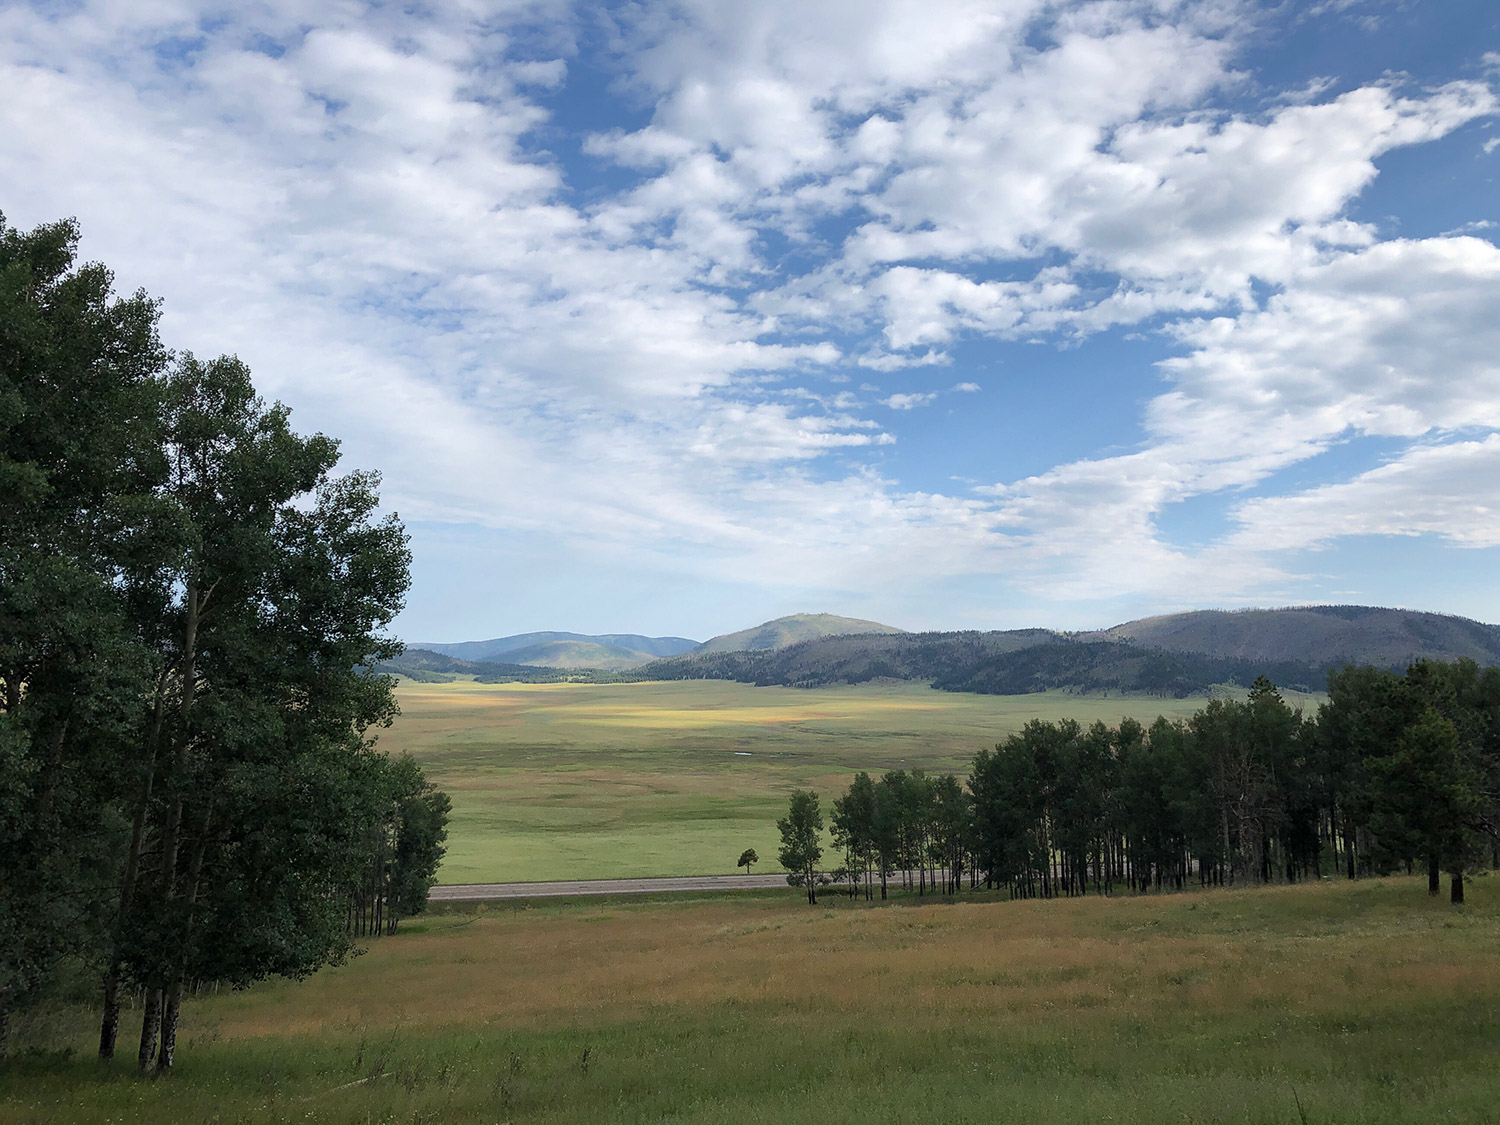 Hiking Trails in Valles Caldera - a book by Coco Rae